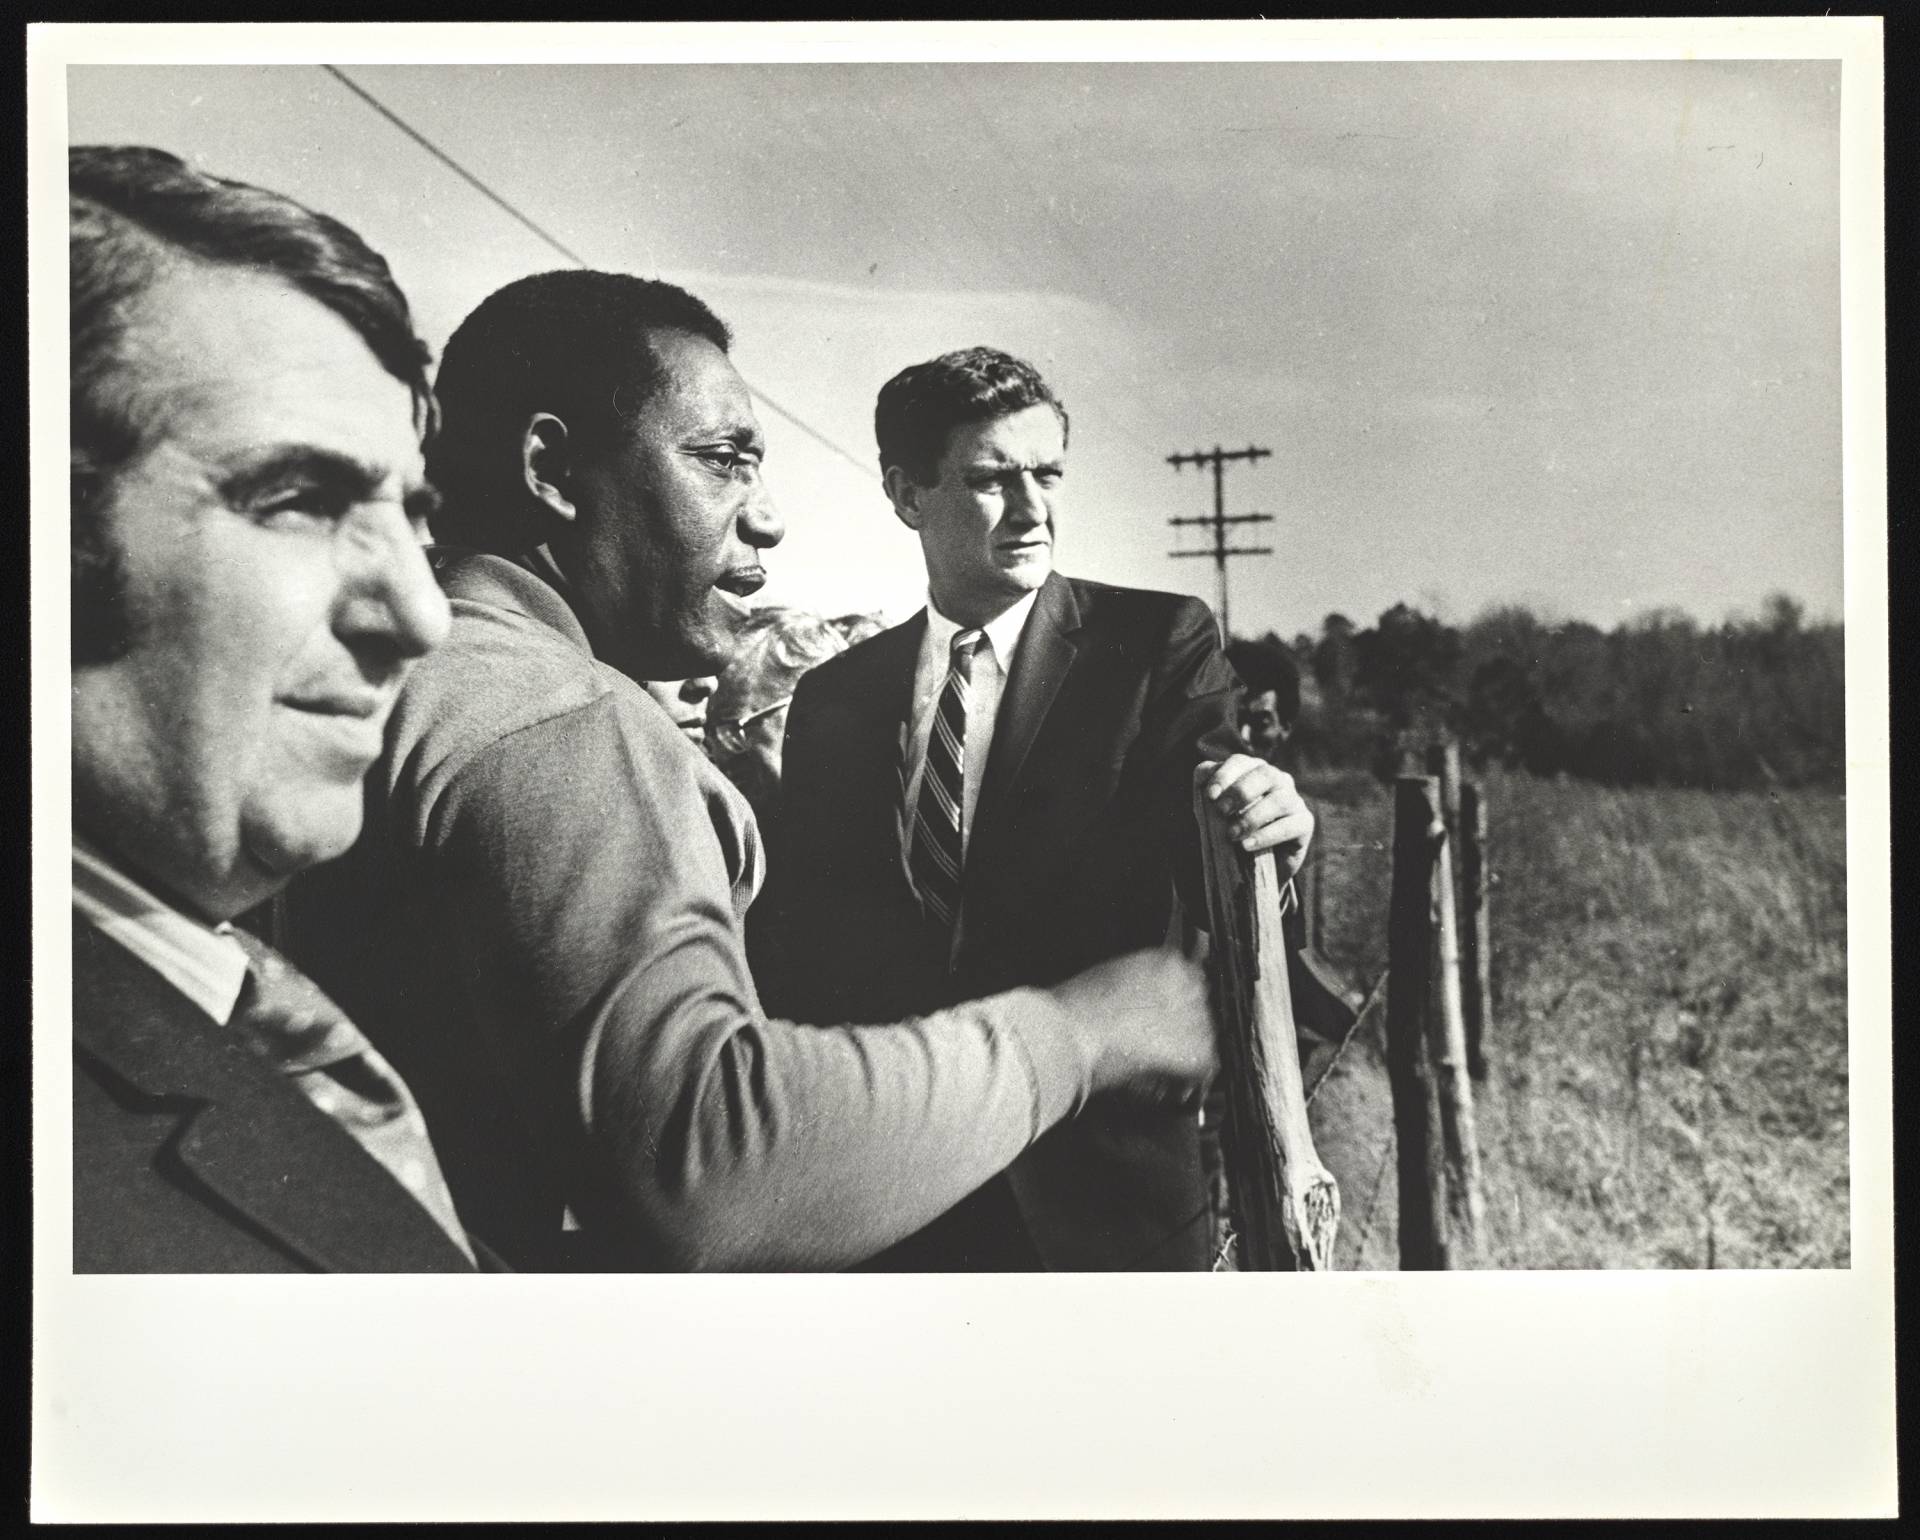 John Doer stands with 2 of his fellow Freedom Riders